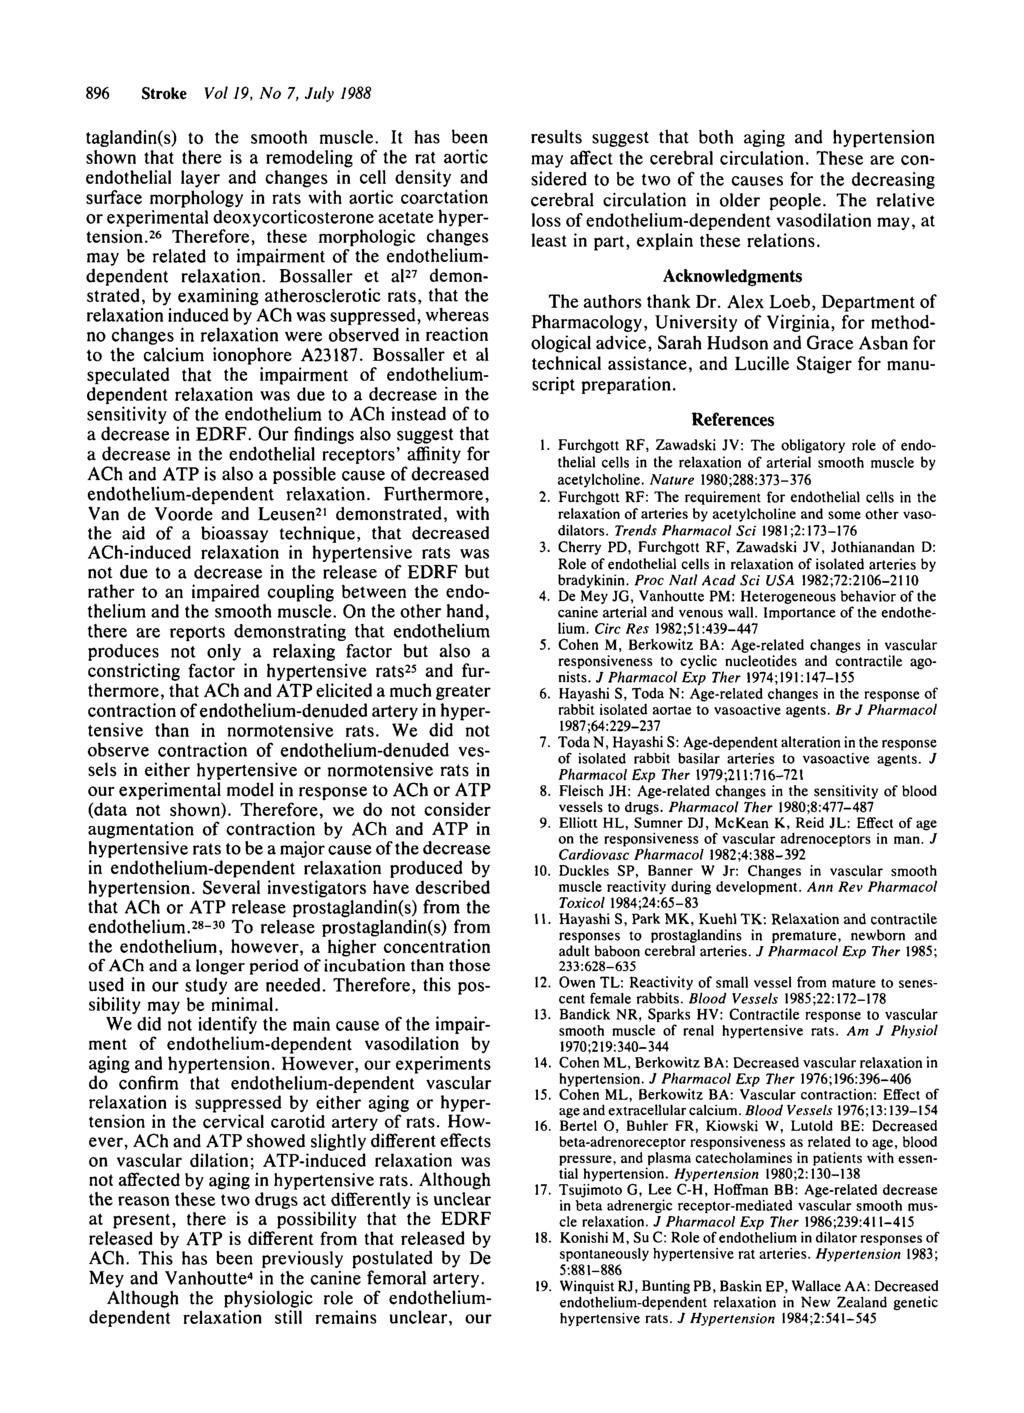 896 Stroke Vol 19, No 7, July 1988 taglandin(s) to the smooth muscle.